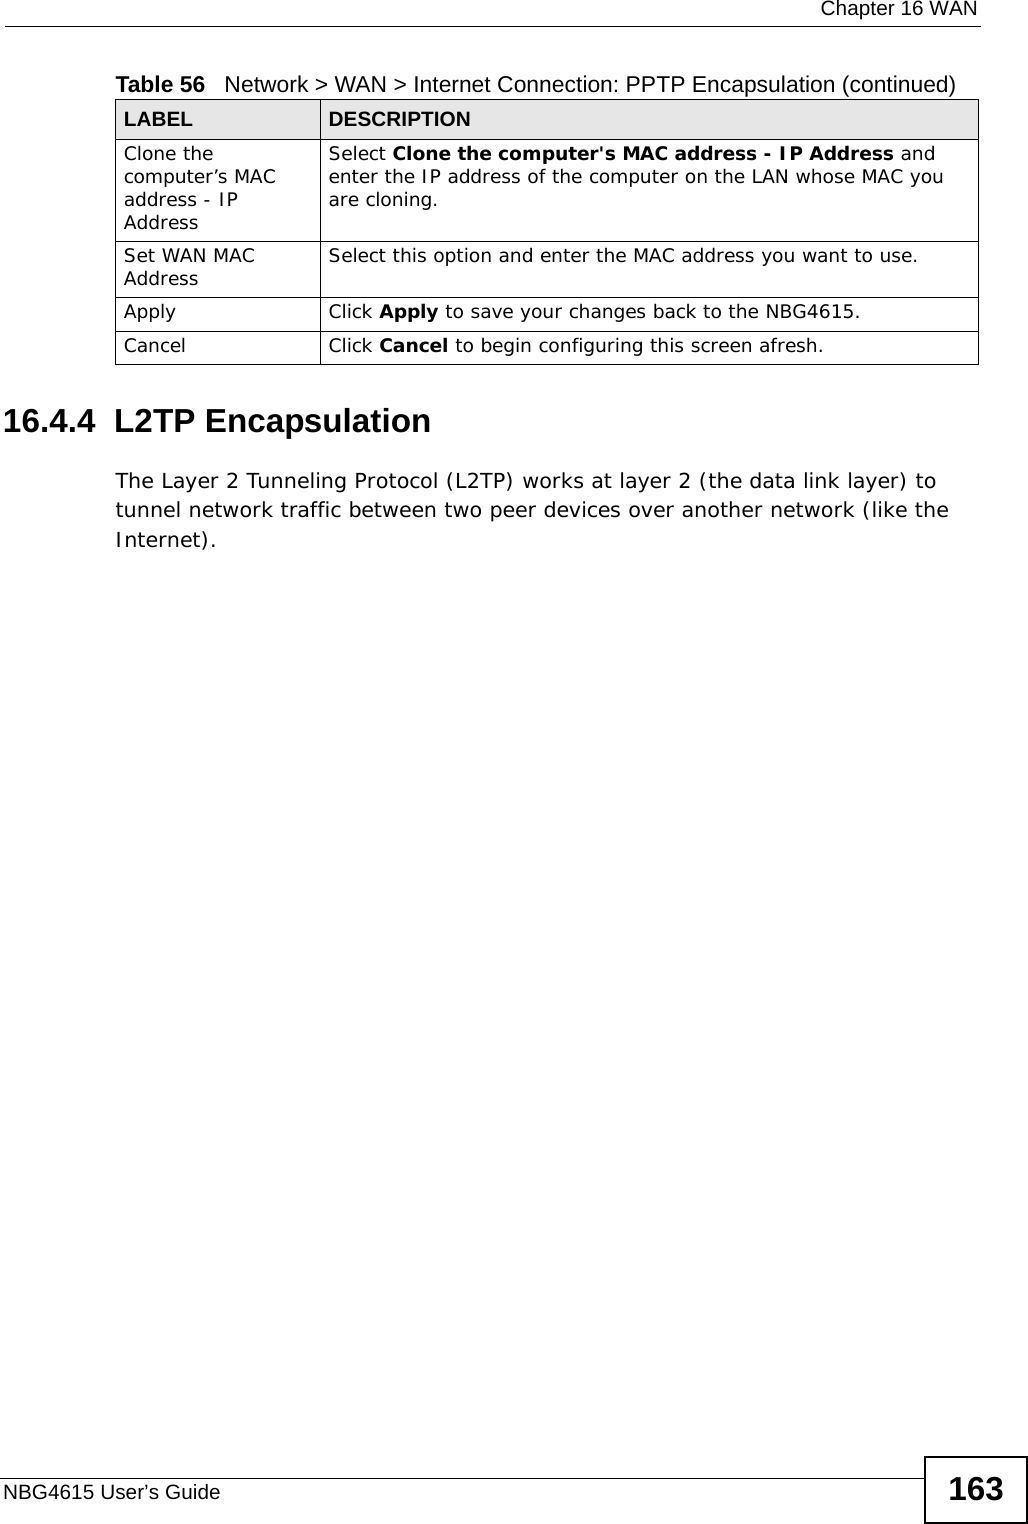  Chapter 16 WANNBG4615 User’s Guide 16316.4.4  L2TP EncapsulationThe Layer 2 Tunneling Protocol (L2TP) works at layer 2 (the data link layer) to tunnel network traffic between two peer devices over another network (like the Internet).Clone the computer’s MAC address - IP AddressSelect Clone the computer&apos;s MAC address - IP Address and enter the IP address of the computer on the LAN whose MAC you are cloning.Set WAN MAC Address Select this option and enter the MAC address you want to use.Apply Click Apply to save your changes back to the NBG4615.Cancel Click Cancel to begin configuring this screen afresh.Table 56   Network &gt; WAN &gt; Internet Connection: PPTP Encapsulation (continued)LABEL DESCRIPTION